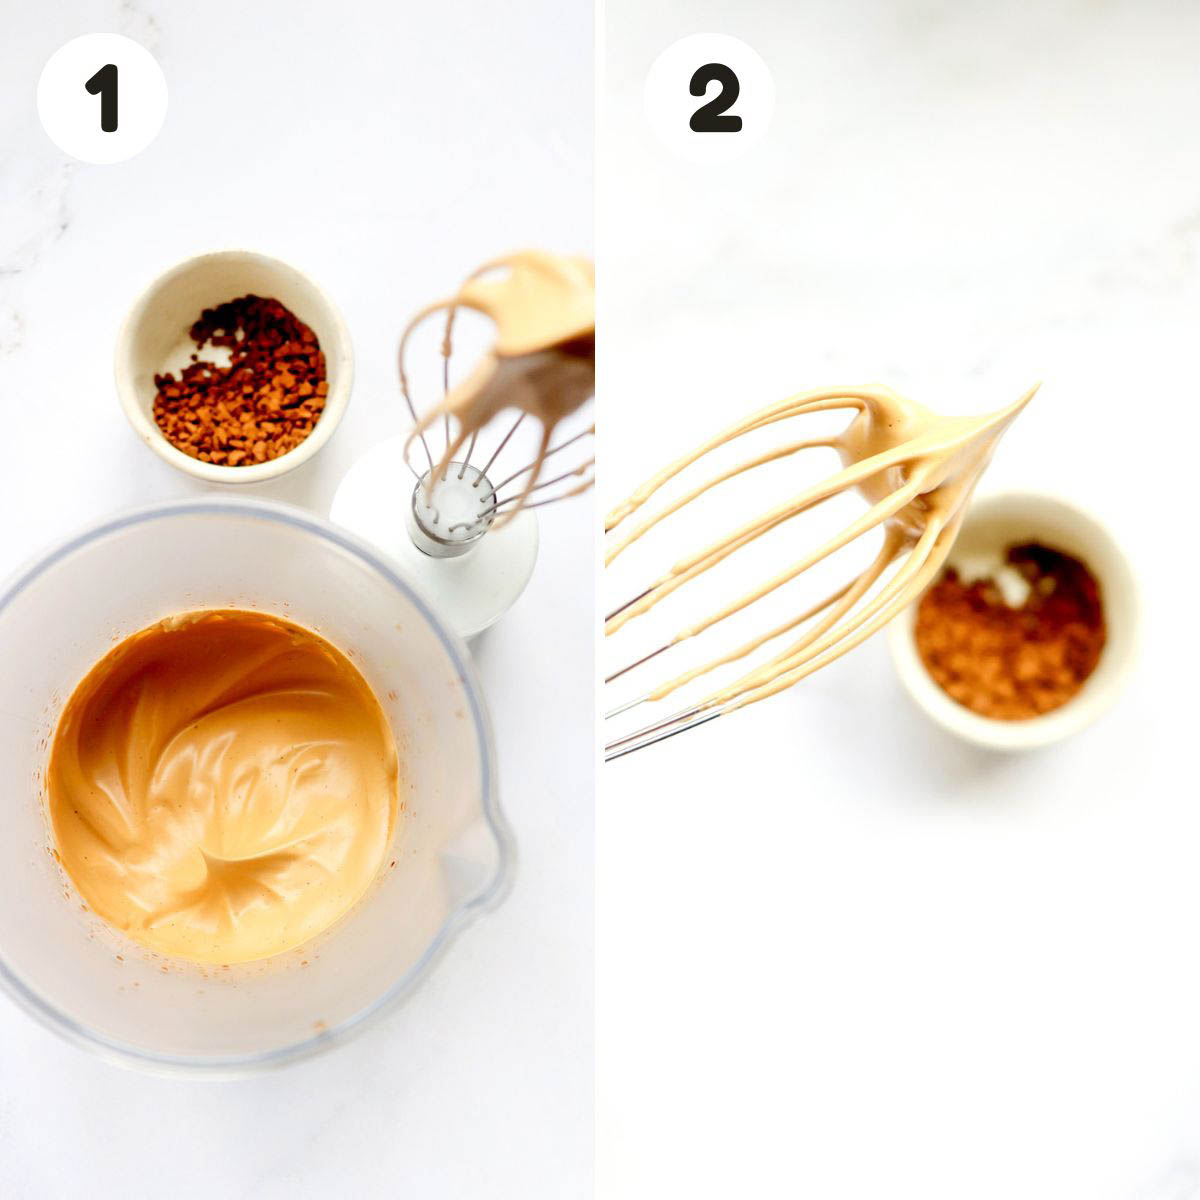 Steps to make the whipped coffee.